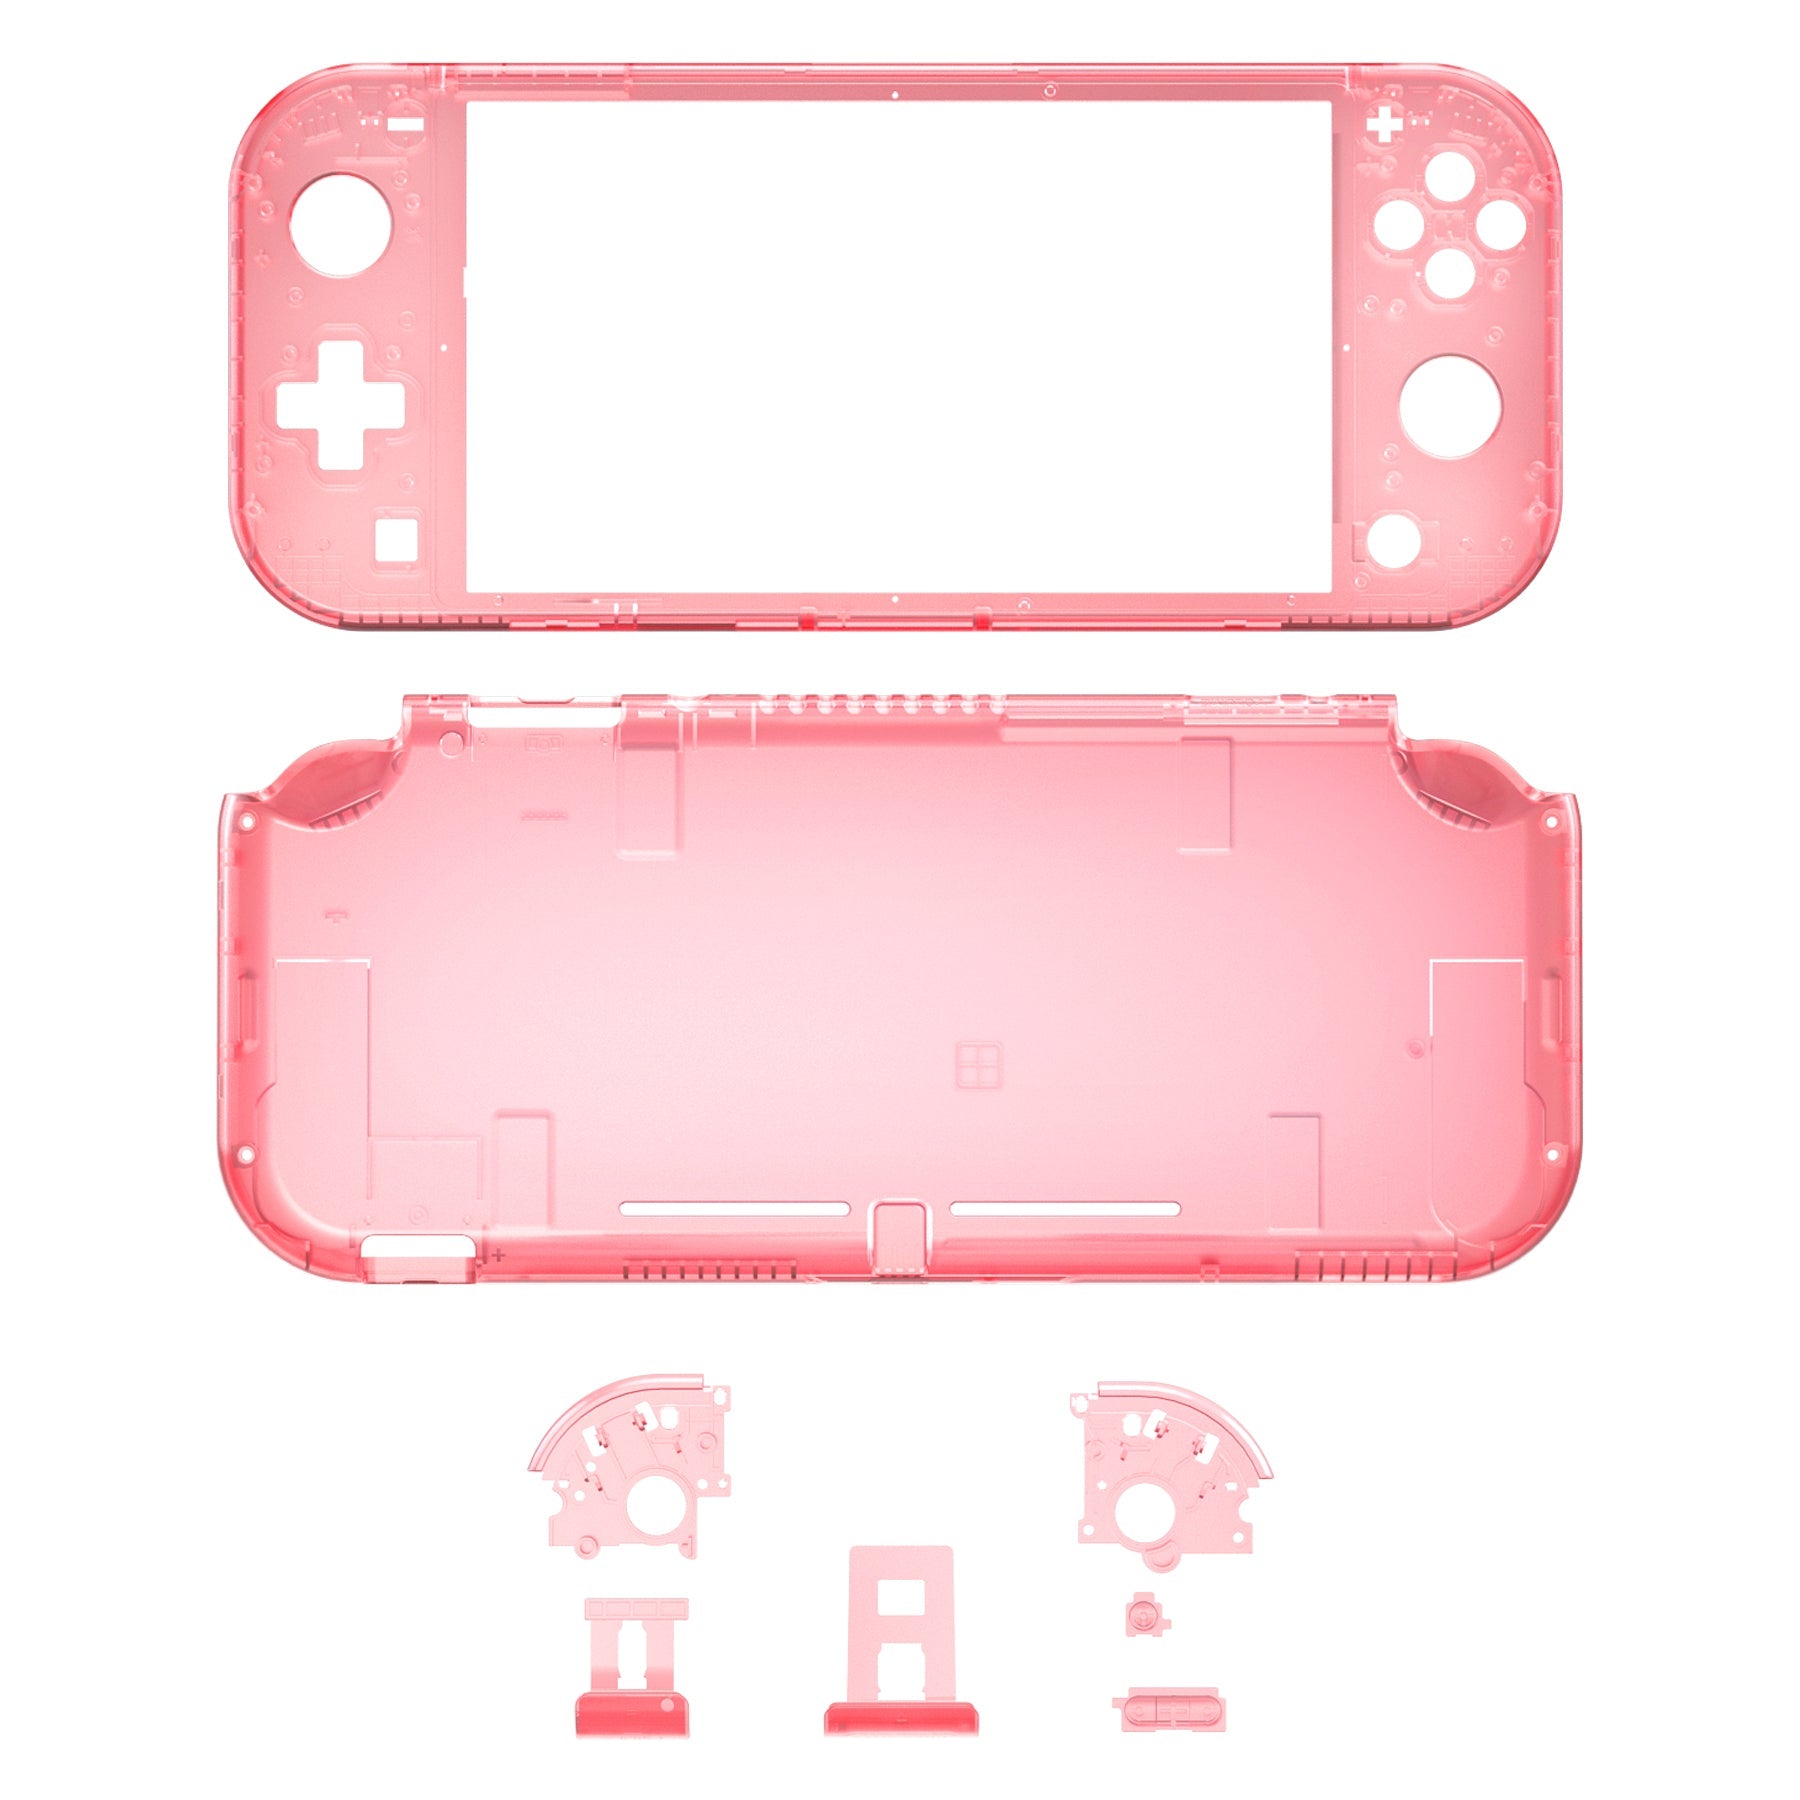 eXtremeRate Retail Cherry Pink DIY Replacement Shell for Nintendo Switch Lite, NSL Handheld Controller Housing with Screen Protector, Custom Case Cover for Nintendo Switch Lite - DLM507